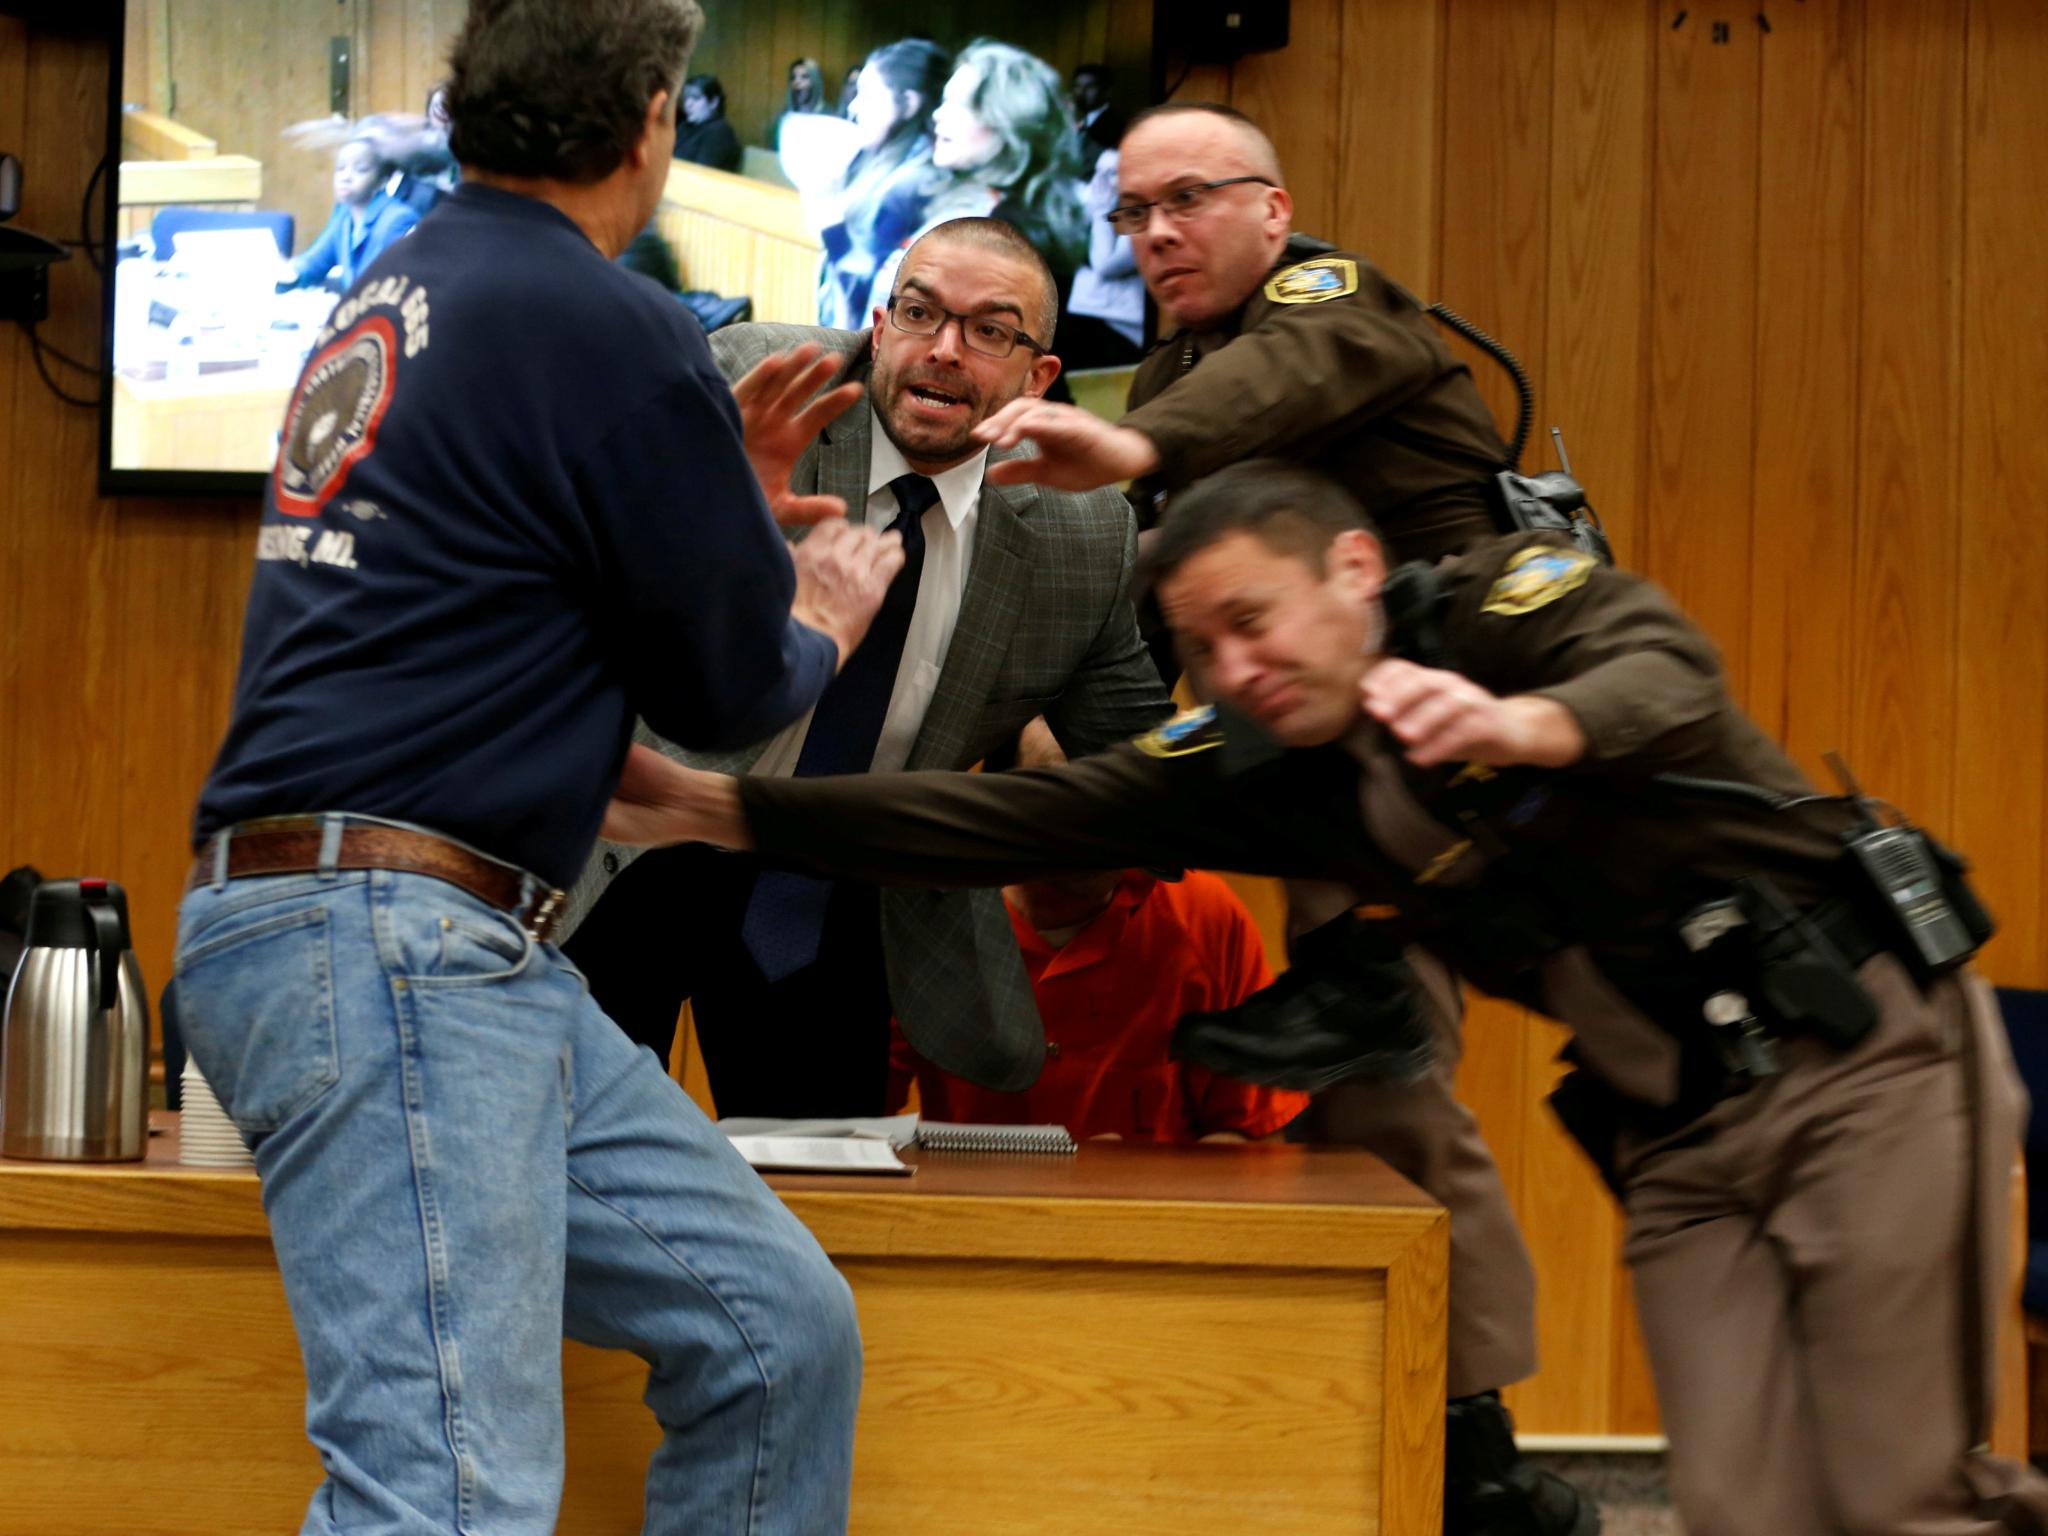 Randall Margraves (L) lunges at Larry Nassar (wearing orange) a former team USA Gymnastics doctor on 2 February 2018. Nassar has been sentenced to more than 175 years in jail.